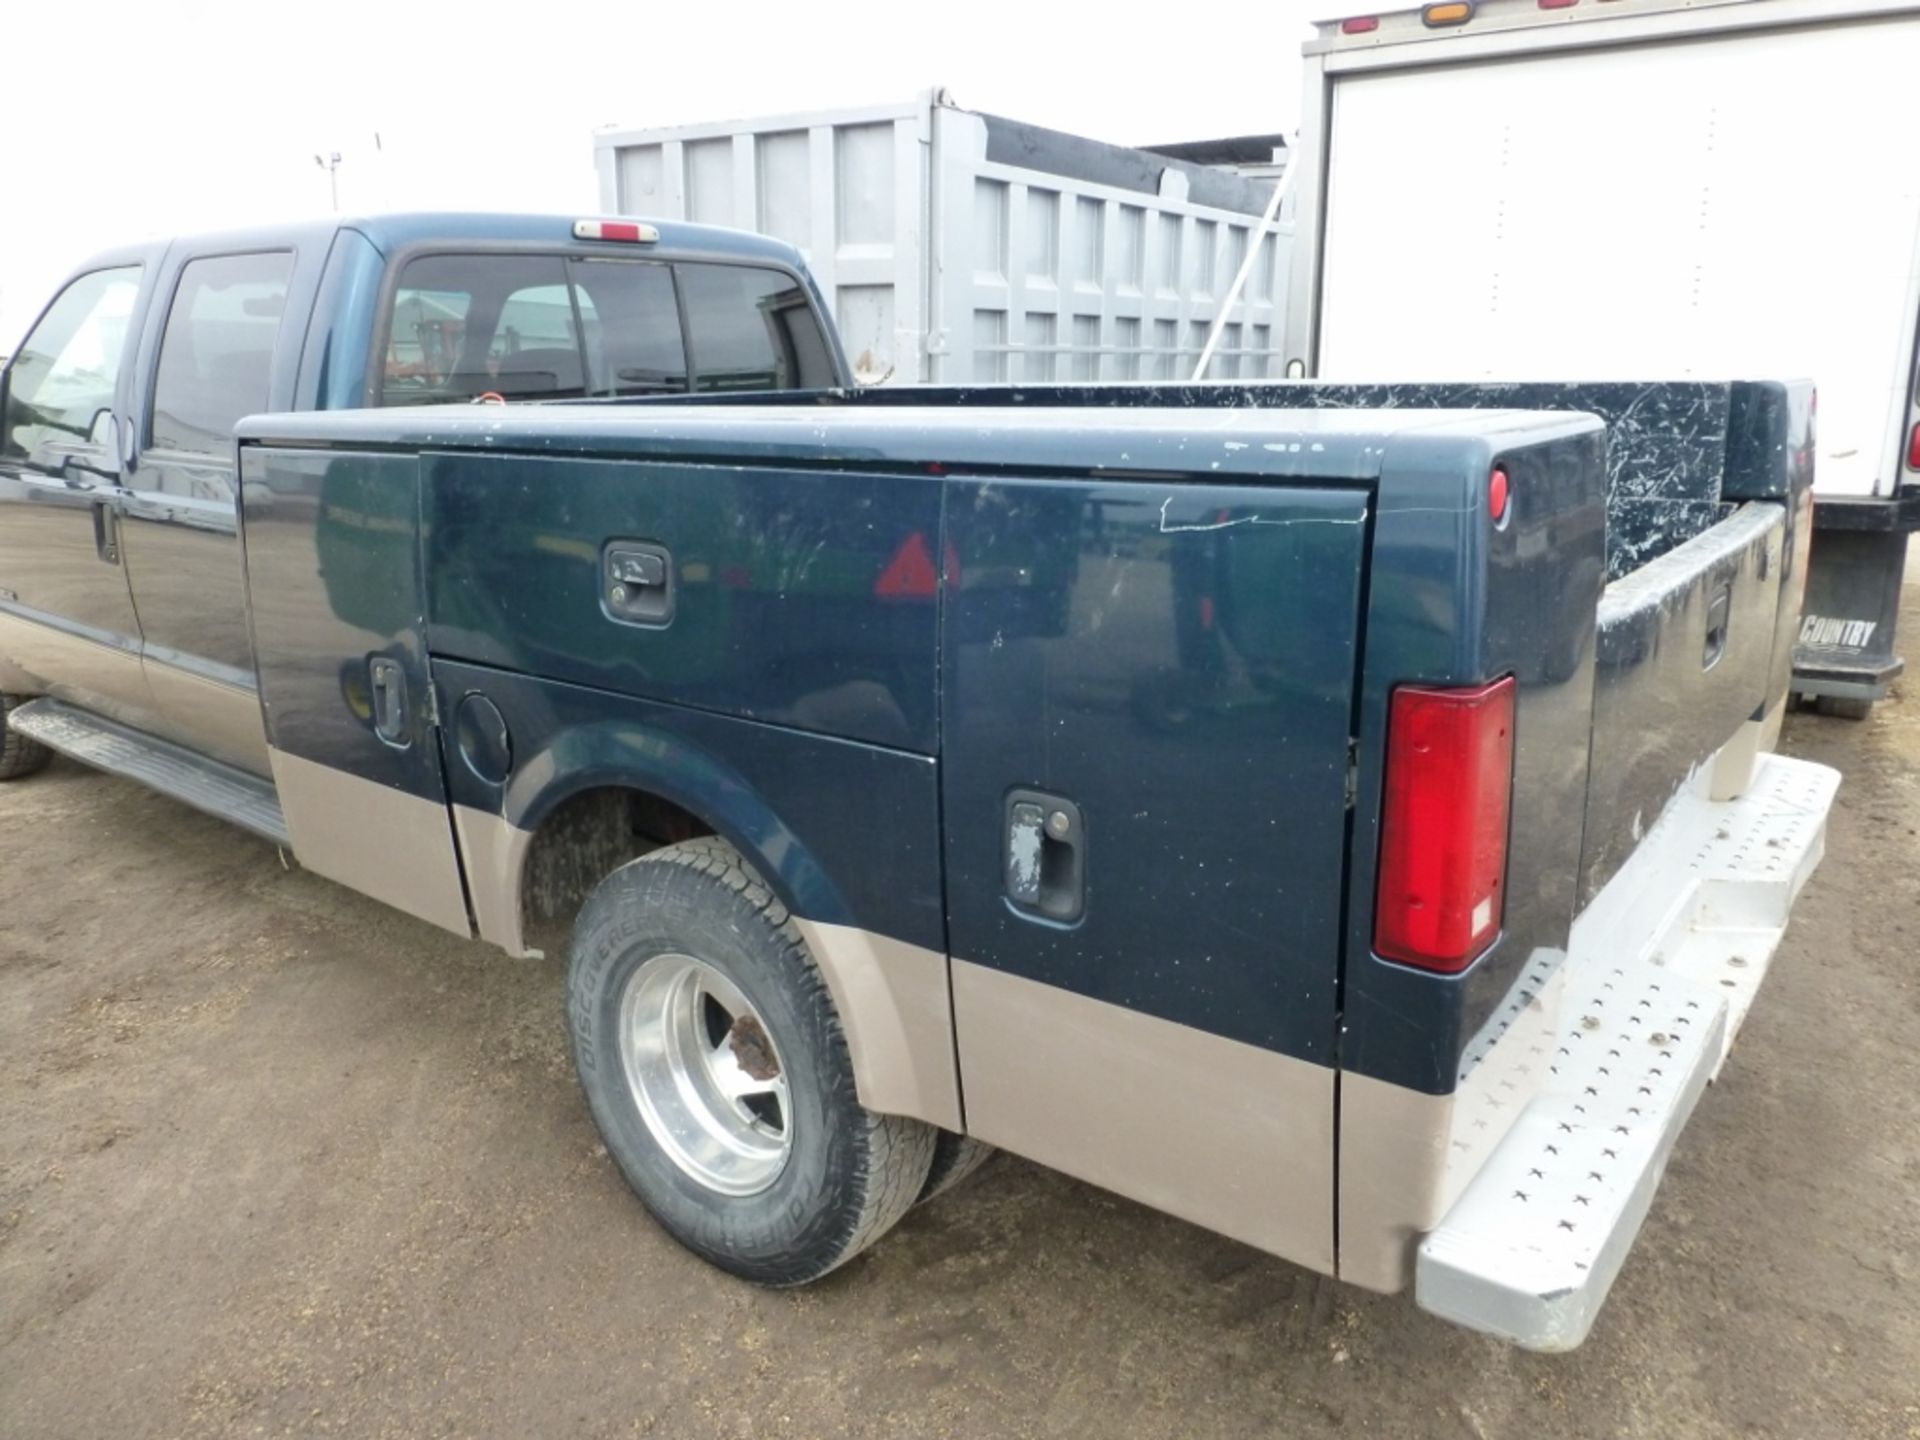 1999 Ford F350 Lariat Crew Cab, 4x4, 7.3 Diesel engine, 208,897 unverified miles, w/ utility bed. - Image 12 of 22